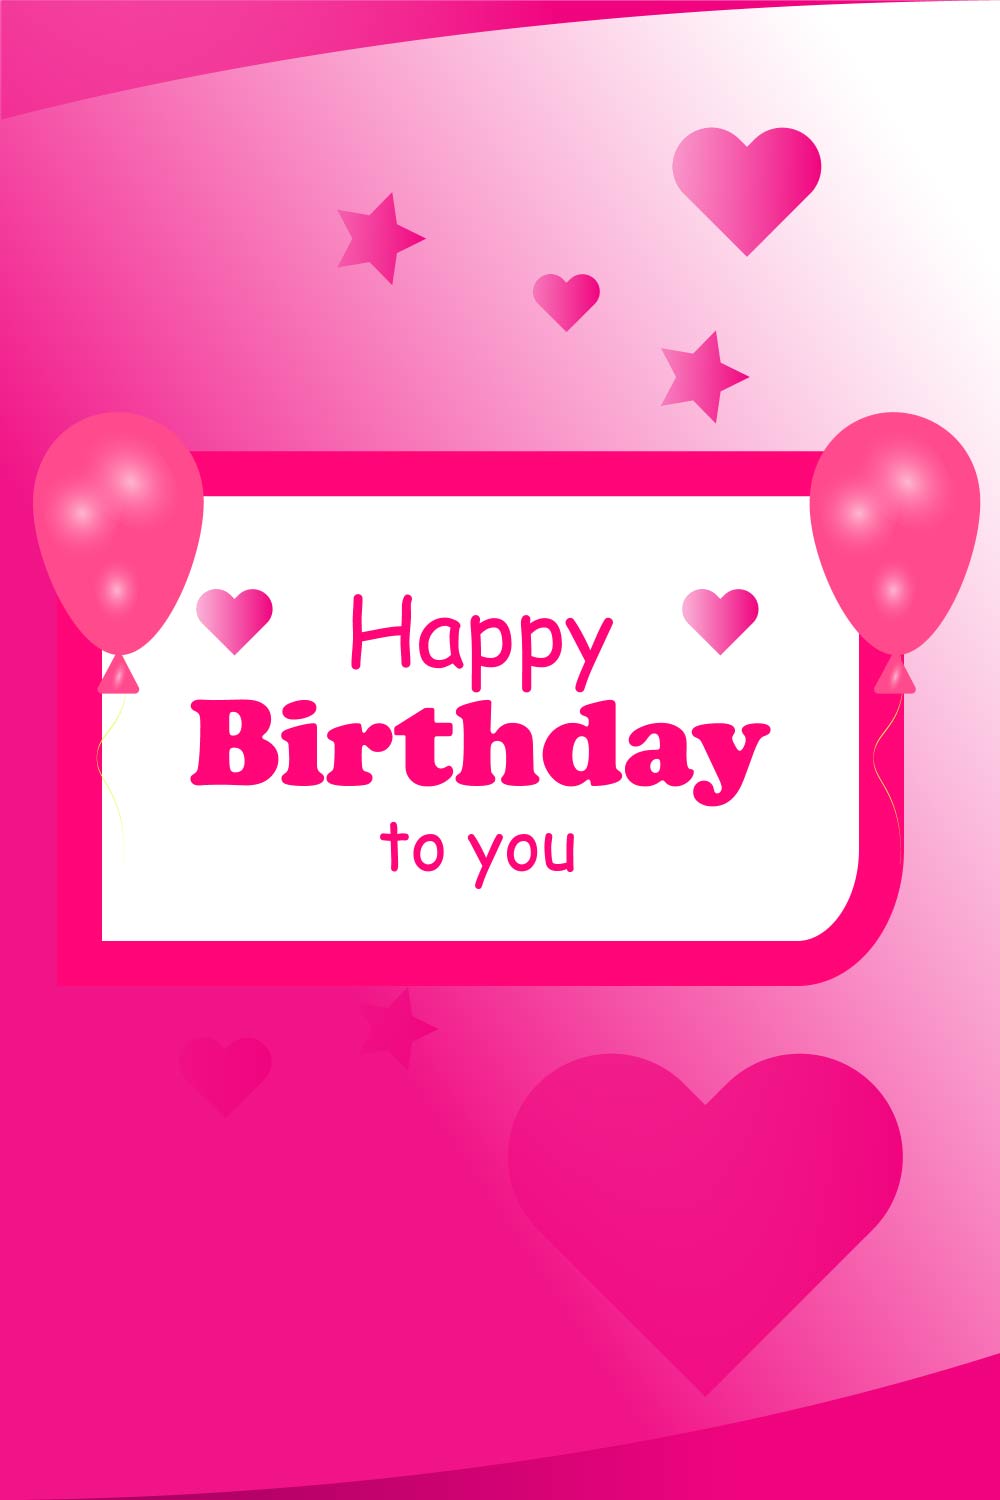 Happy Birthday to You Card Design The Zipped folders includes AI, PSD, EPS, SVG and HQ JPG Image pinterest preview image.